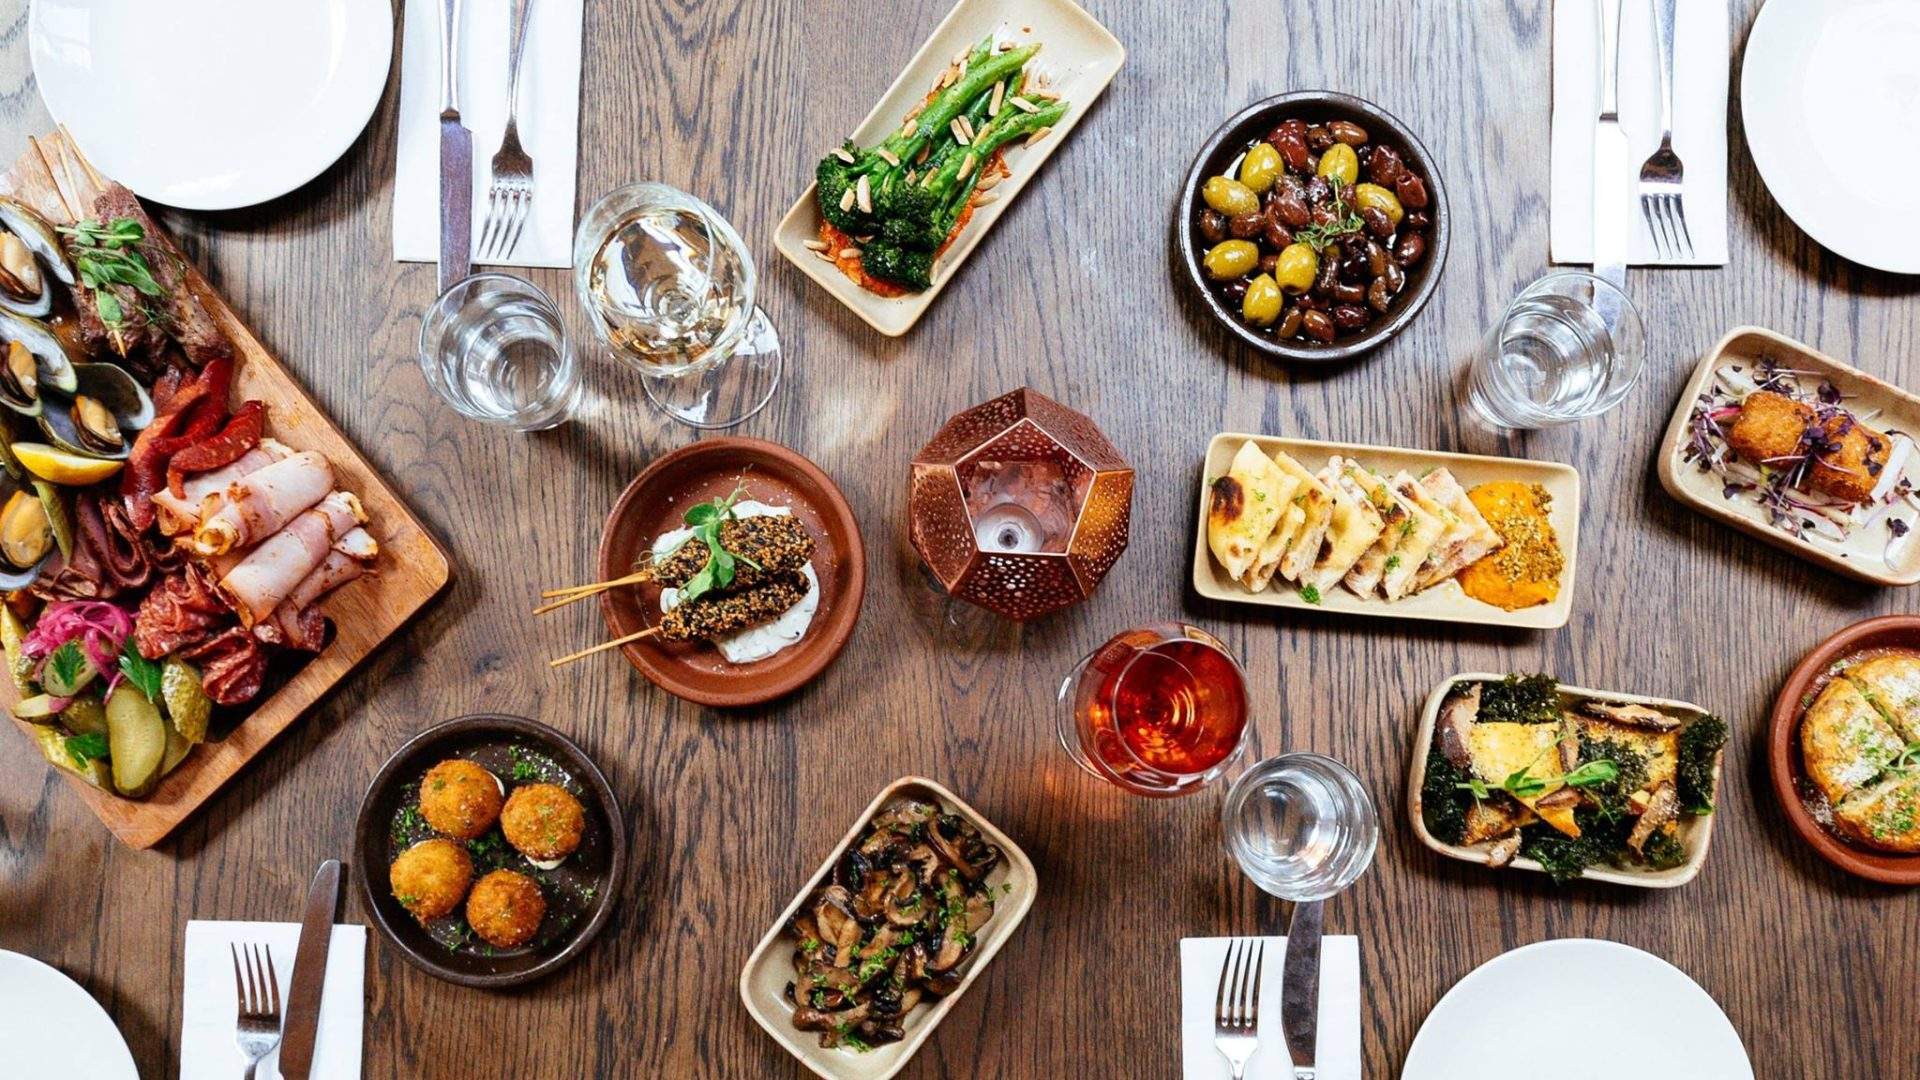 This Inner City Bar Has Launched a $1 Tapas Menu